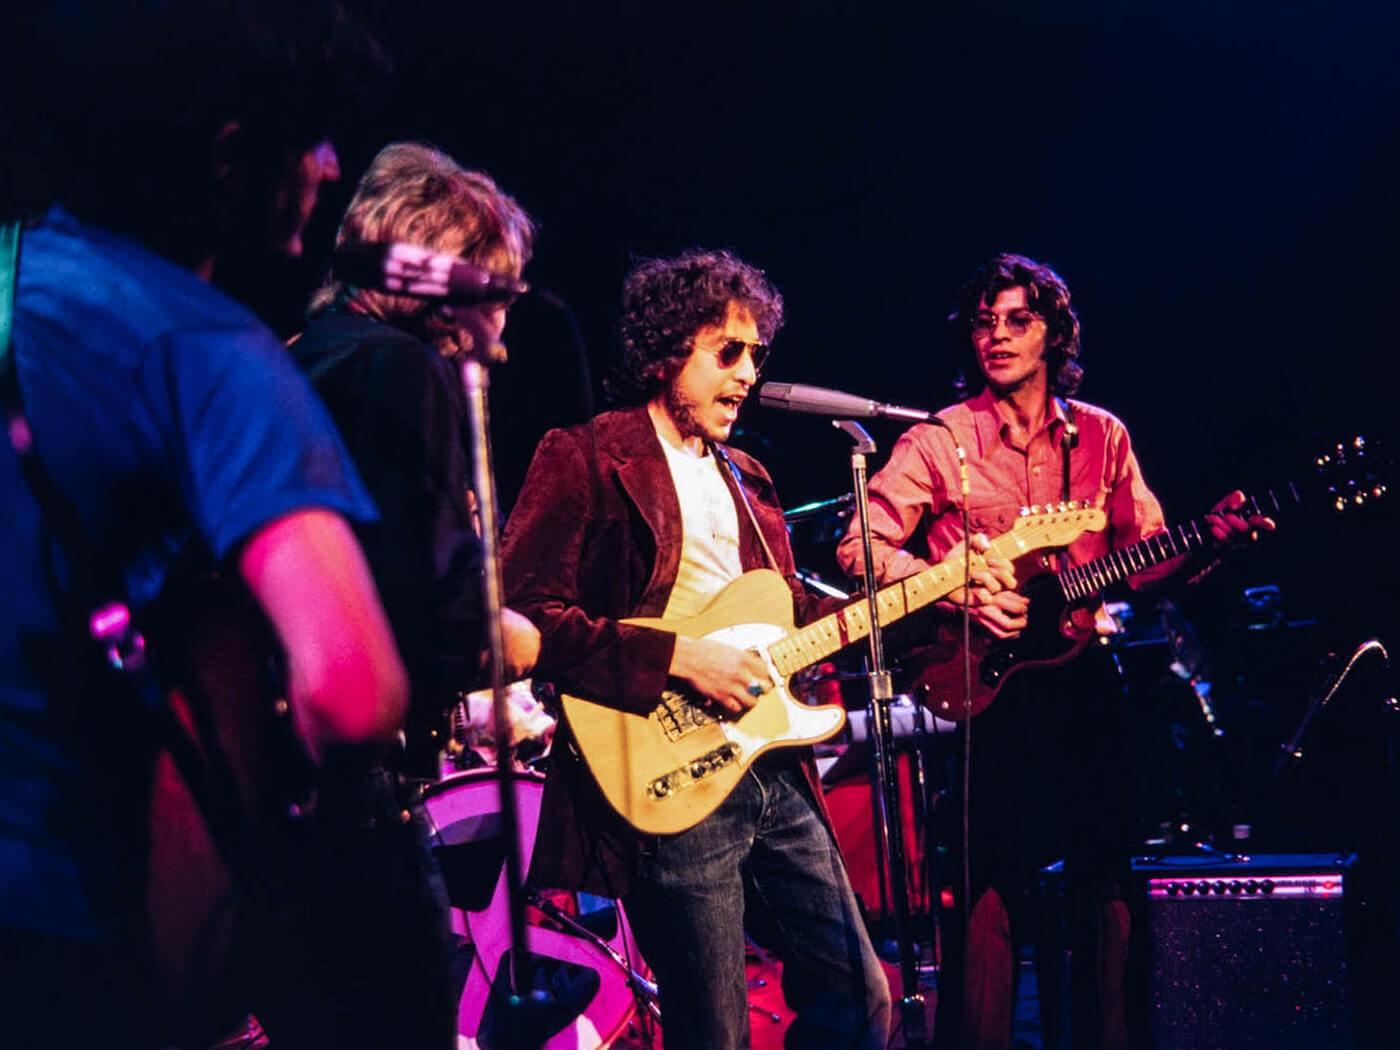 Previously unseen photos of The Band and Bob Dylan released